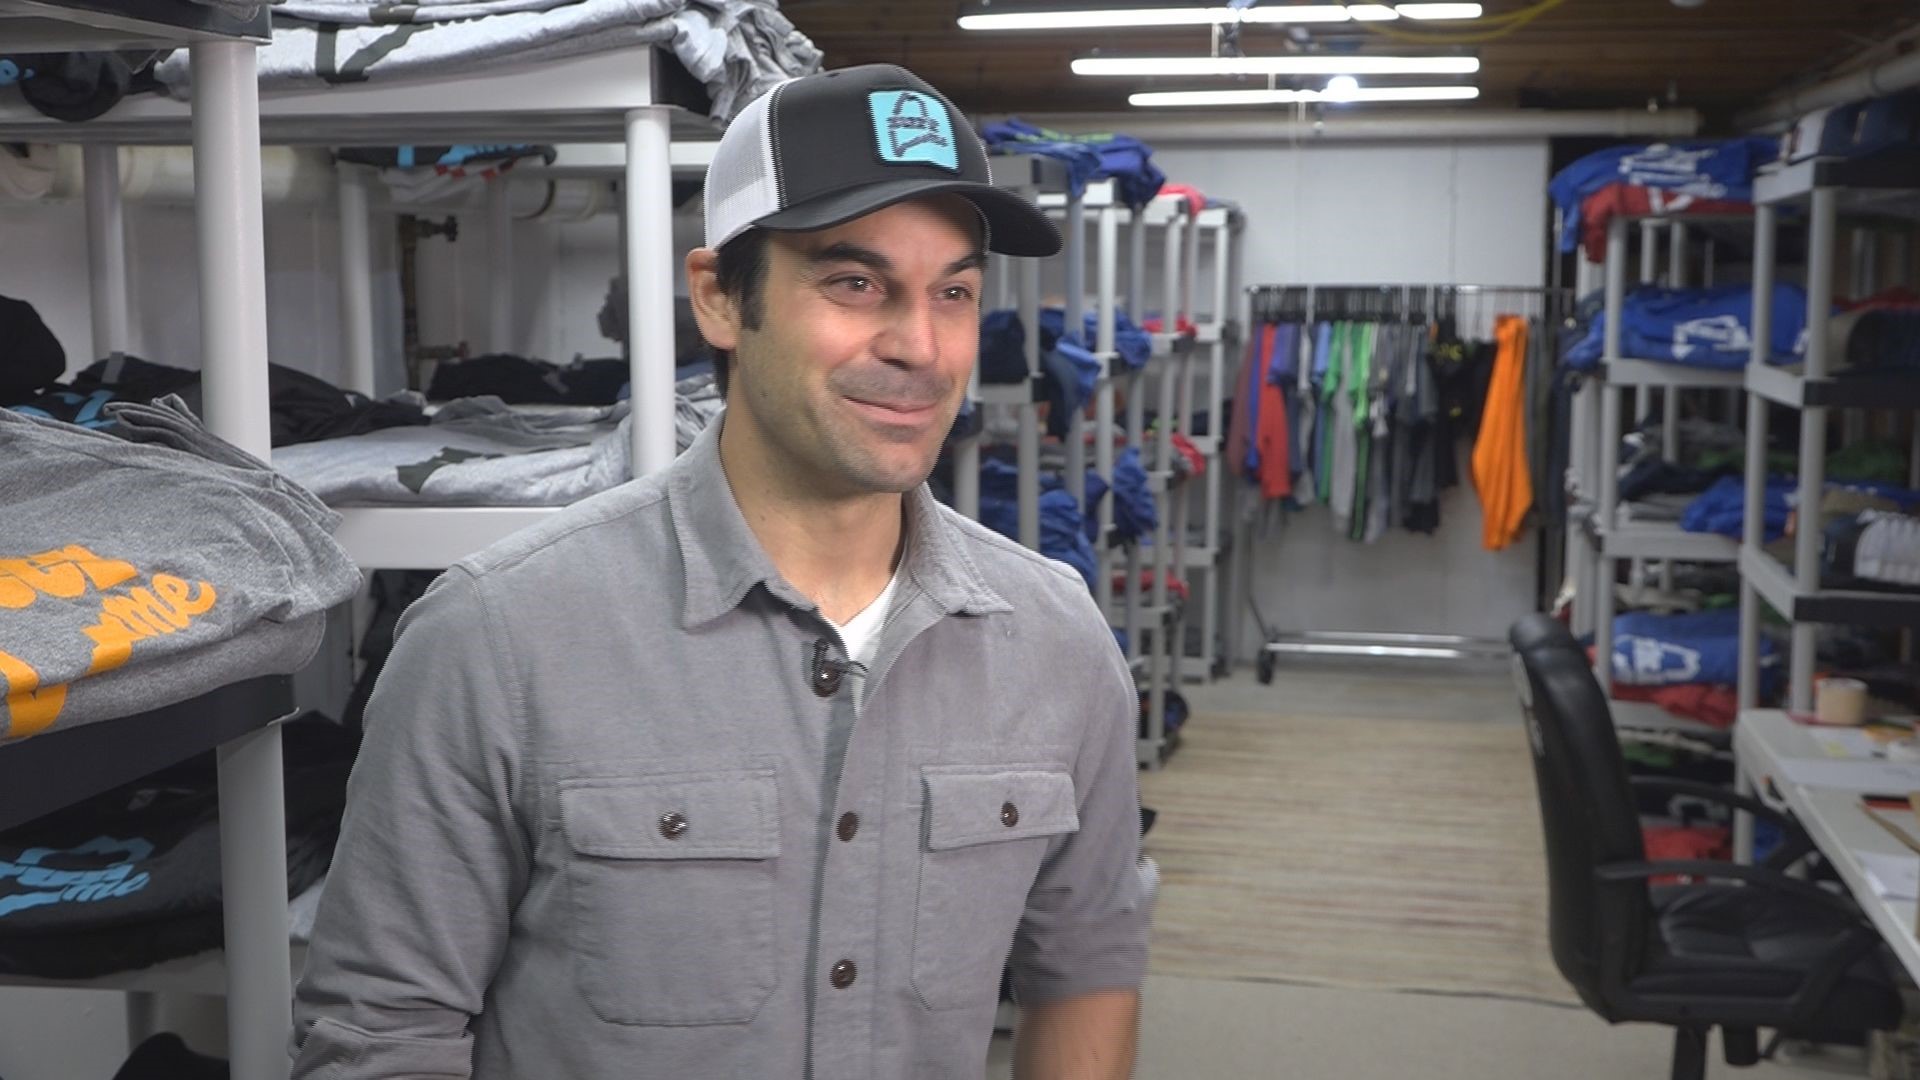 Chris Avantaggio got his side hustle on by accident and it grew into a big Maine-based brand.